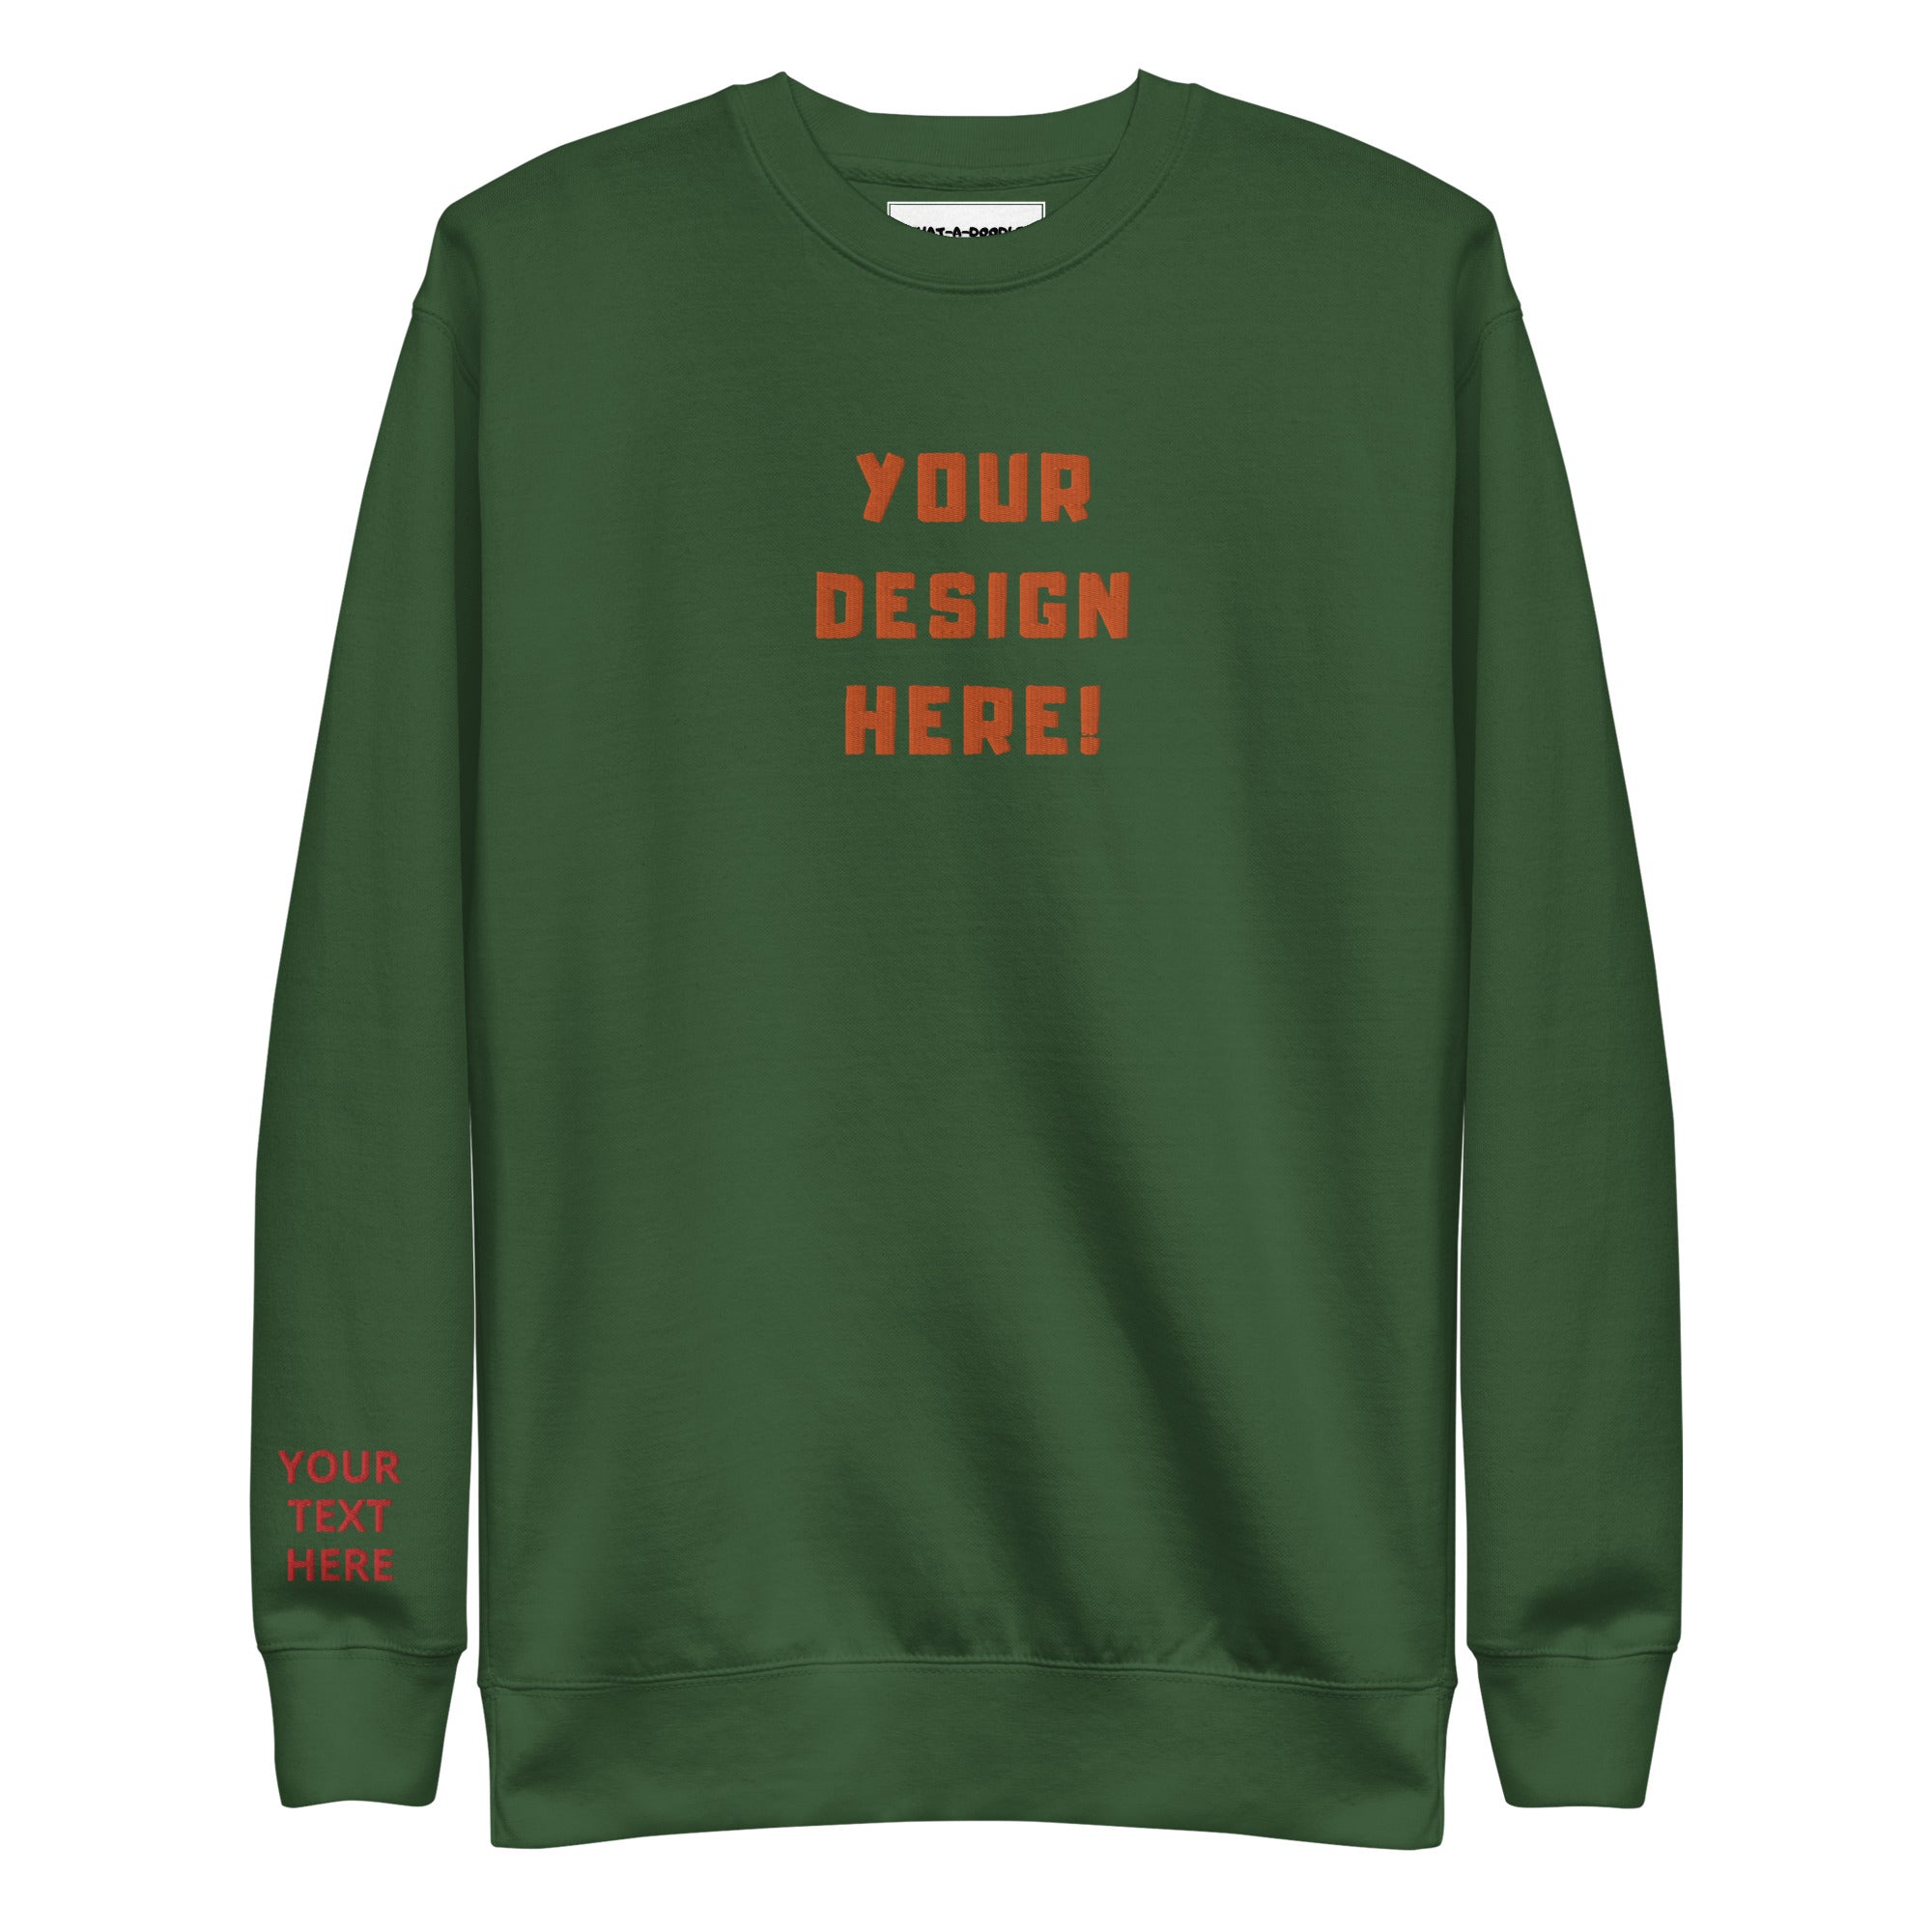 Custom adults embroidered forest green sweatshirt. Sleeve text is customizable. 